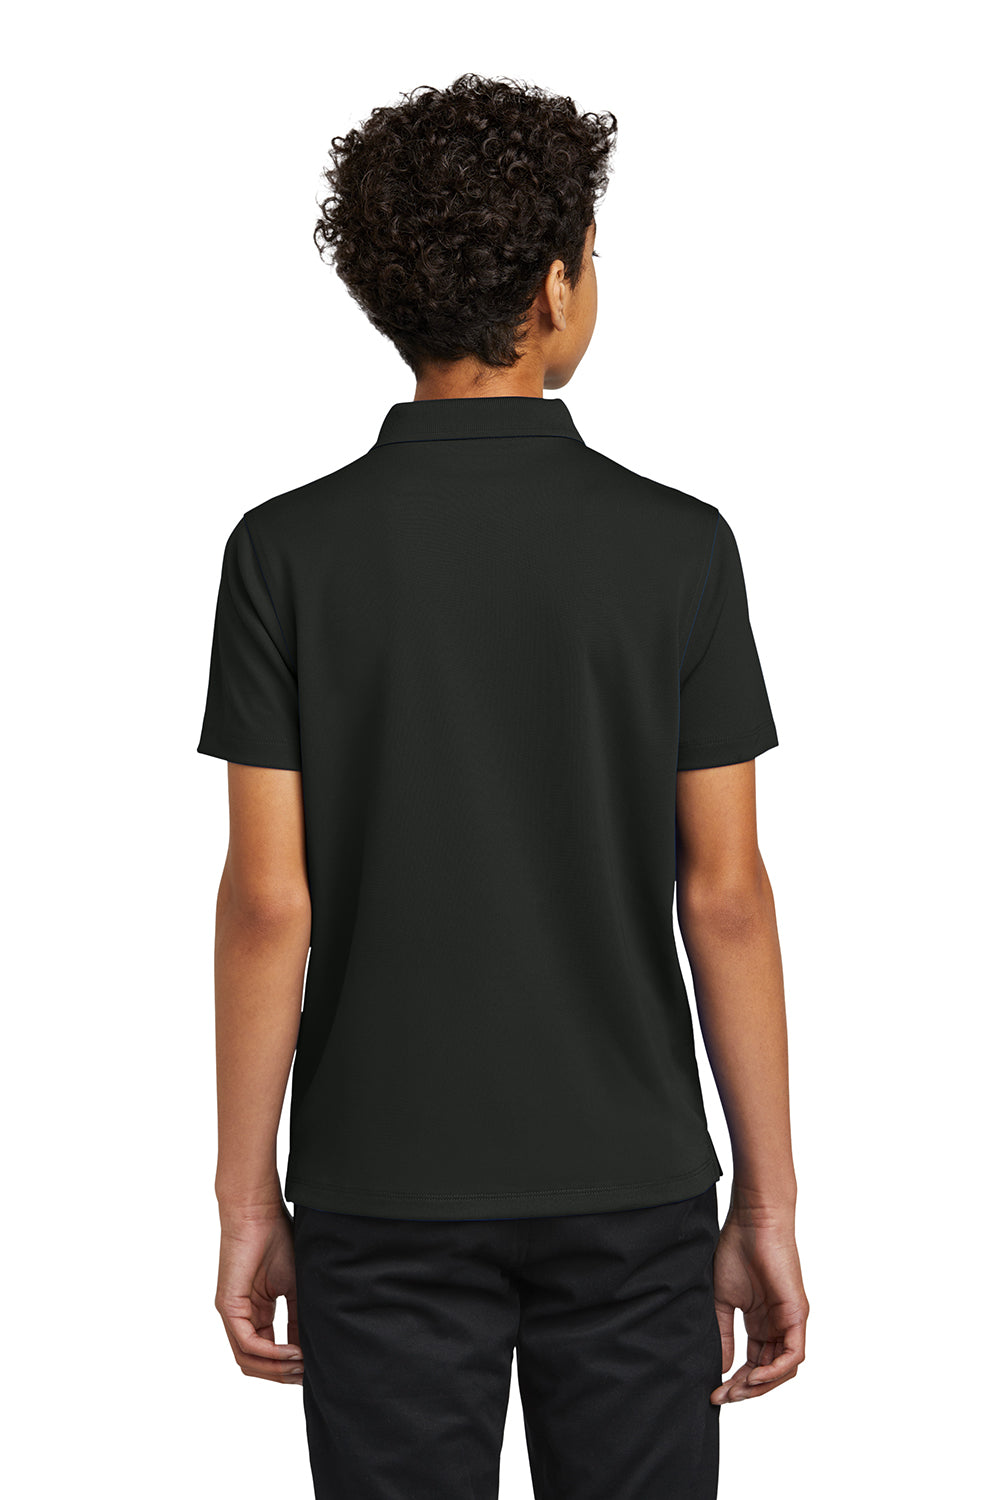 Port Authority Y110 Youth Dry Zone Moisture Wicking Short Sleeve Polo Shirt Deep Black Back